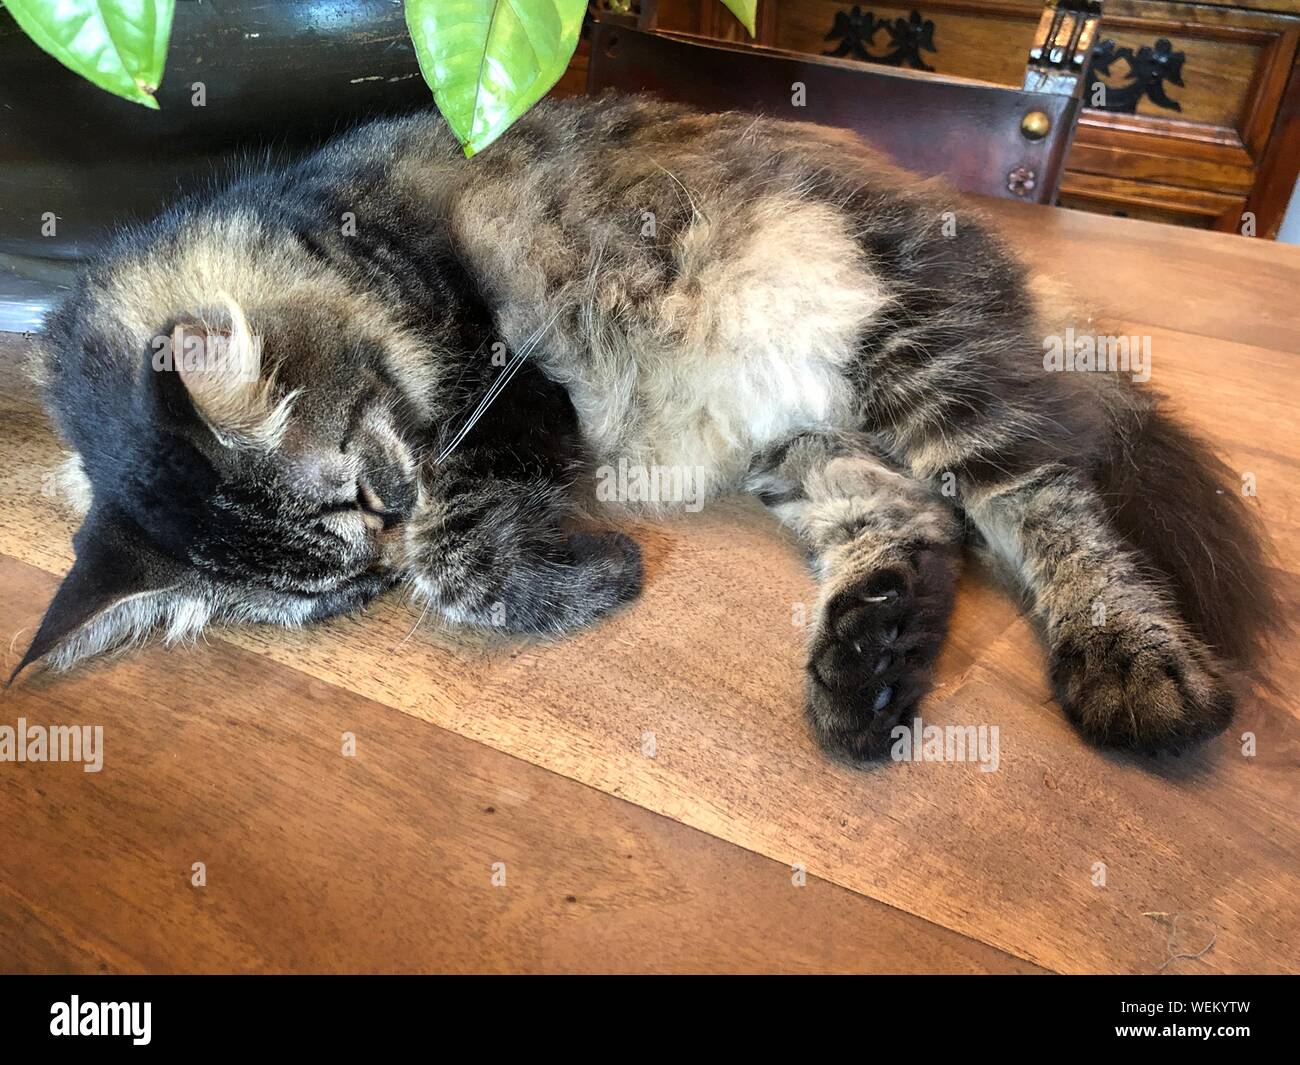 A pampered cat sleeps on a table at the Ernest Hemingway house in Key West, Florida. Stock Photo